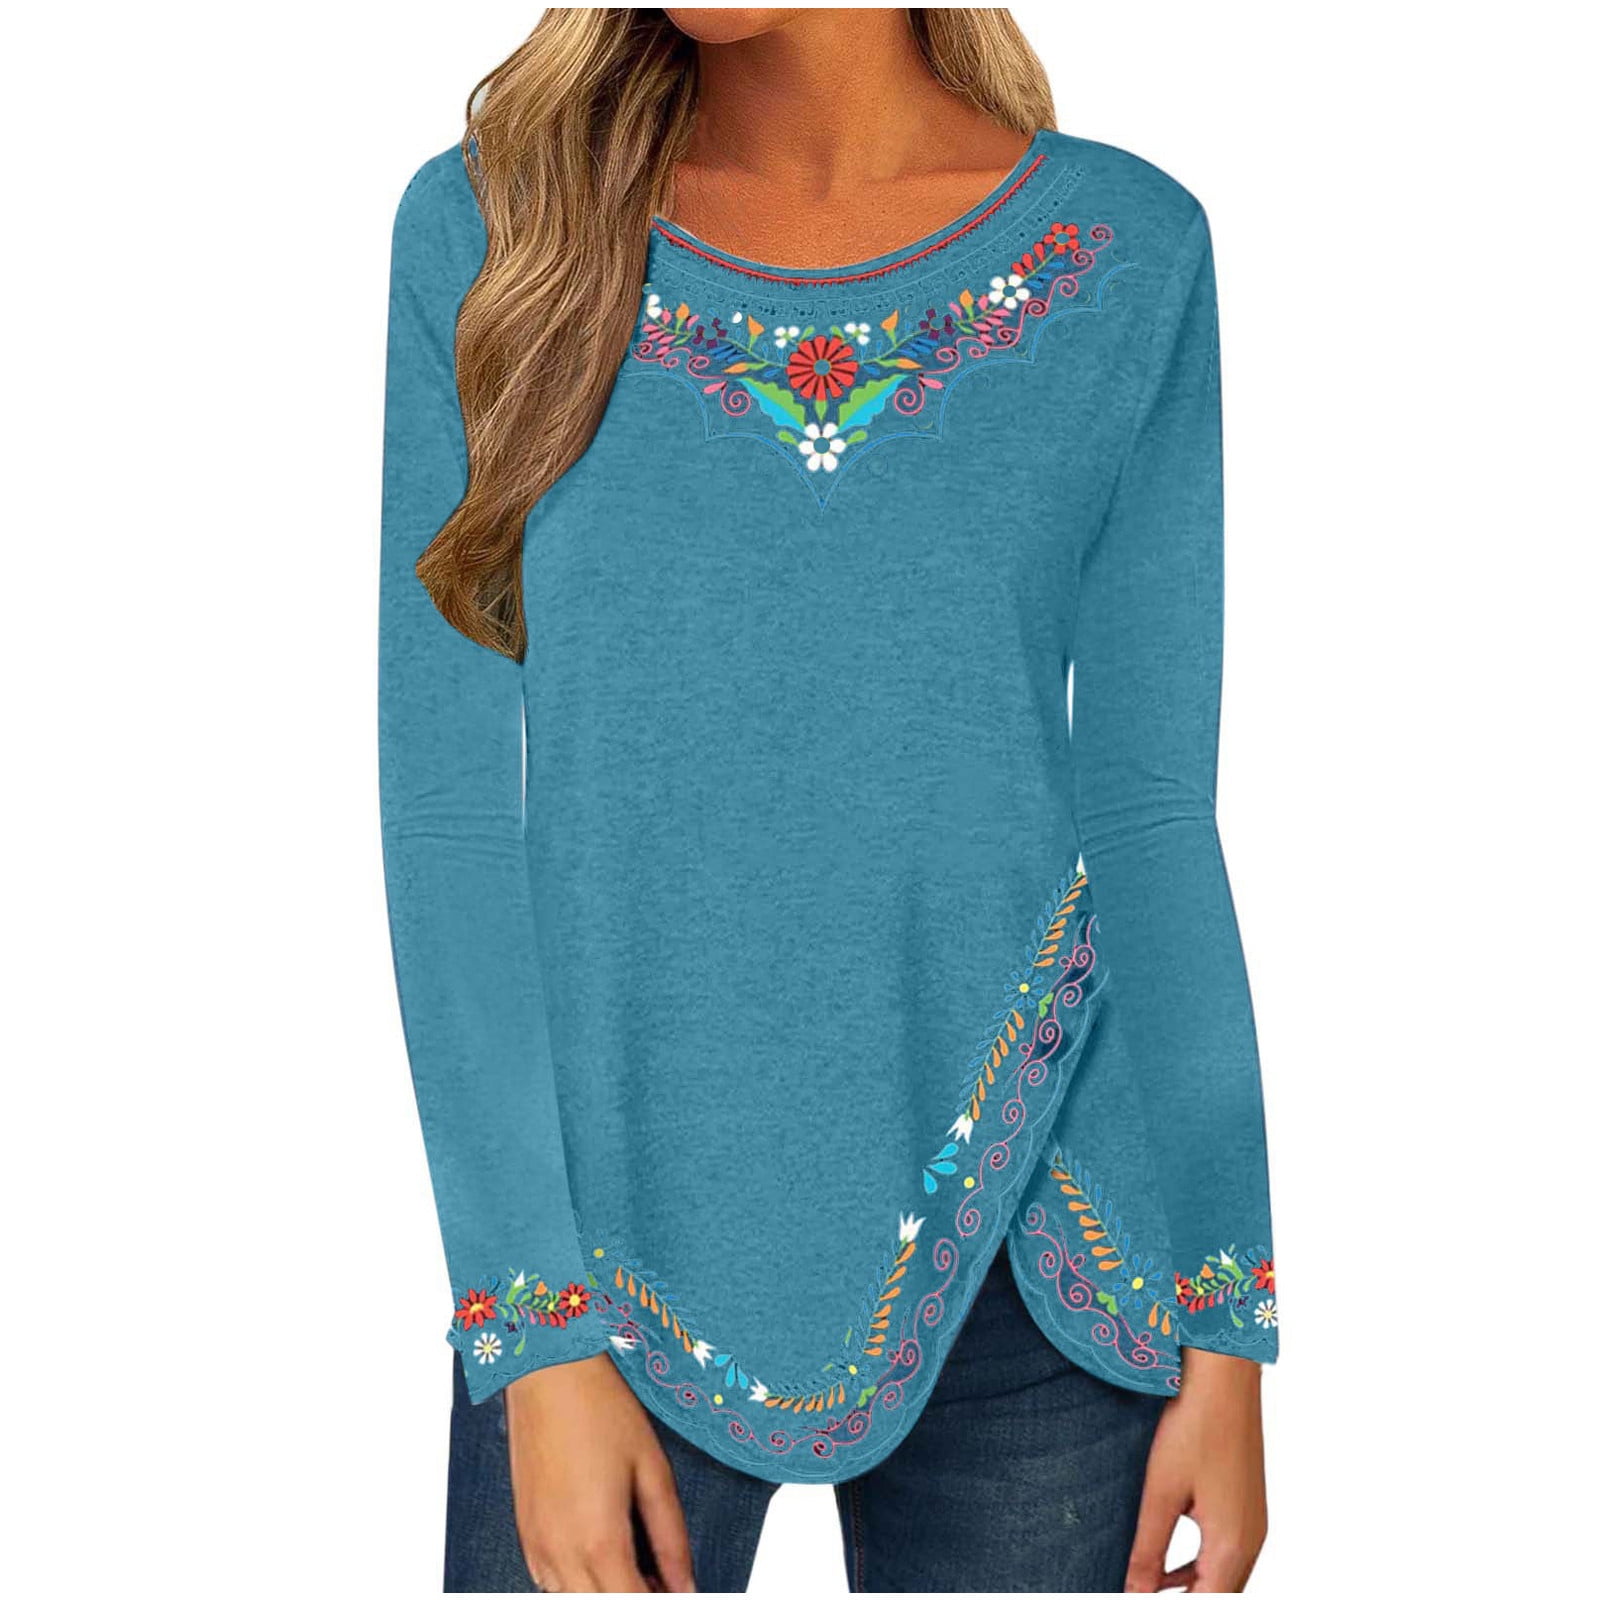 Giftesty Womens Long Sleeve Tops Clearance Women's Round-Neck Long ...